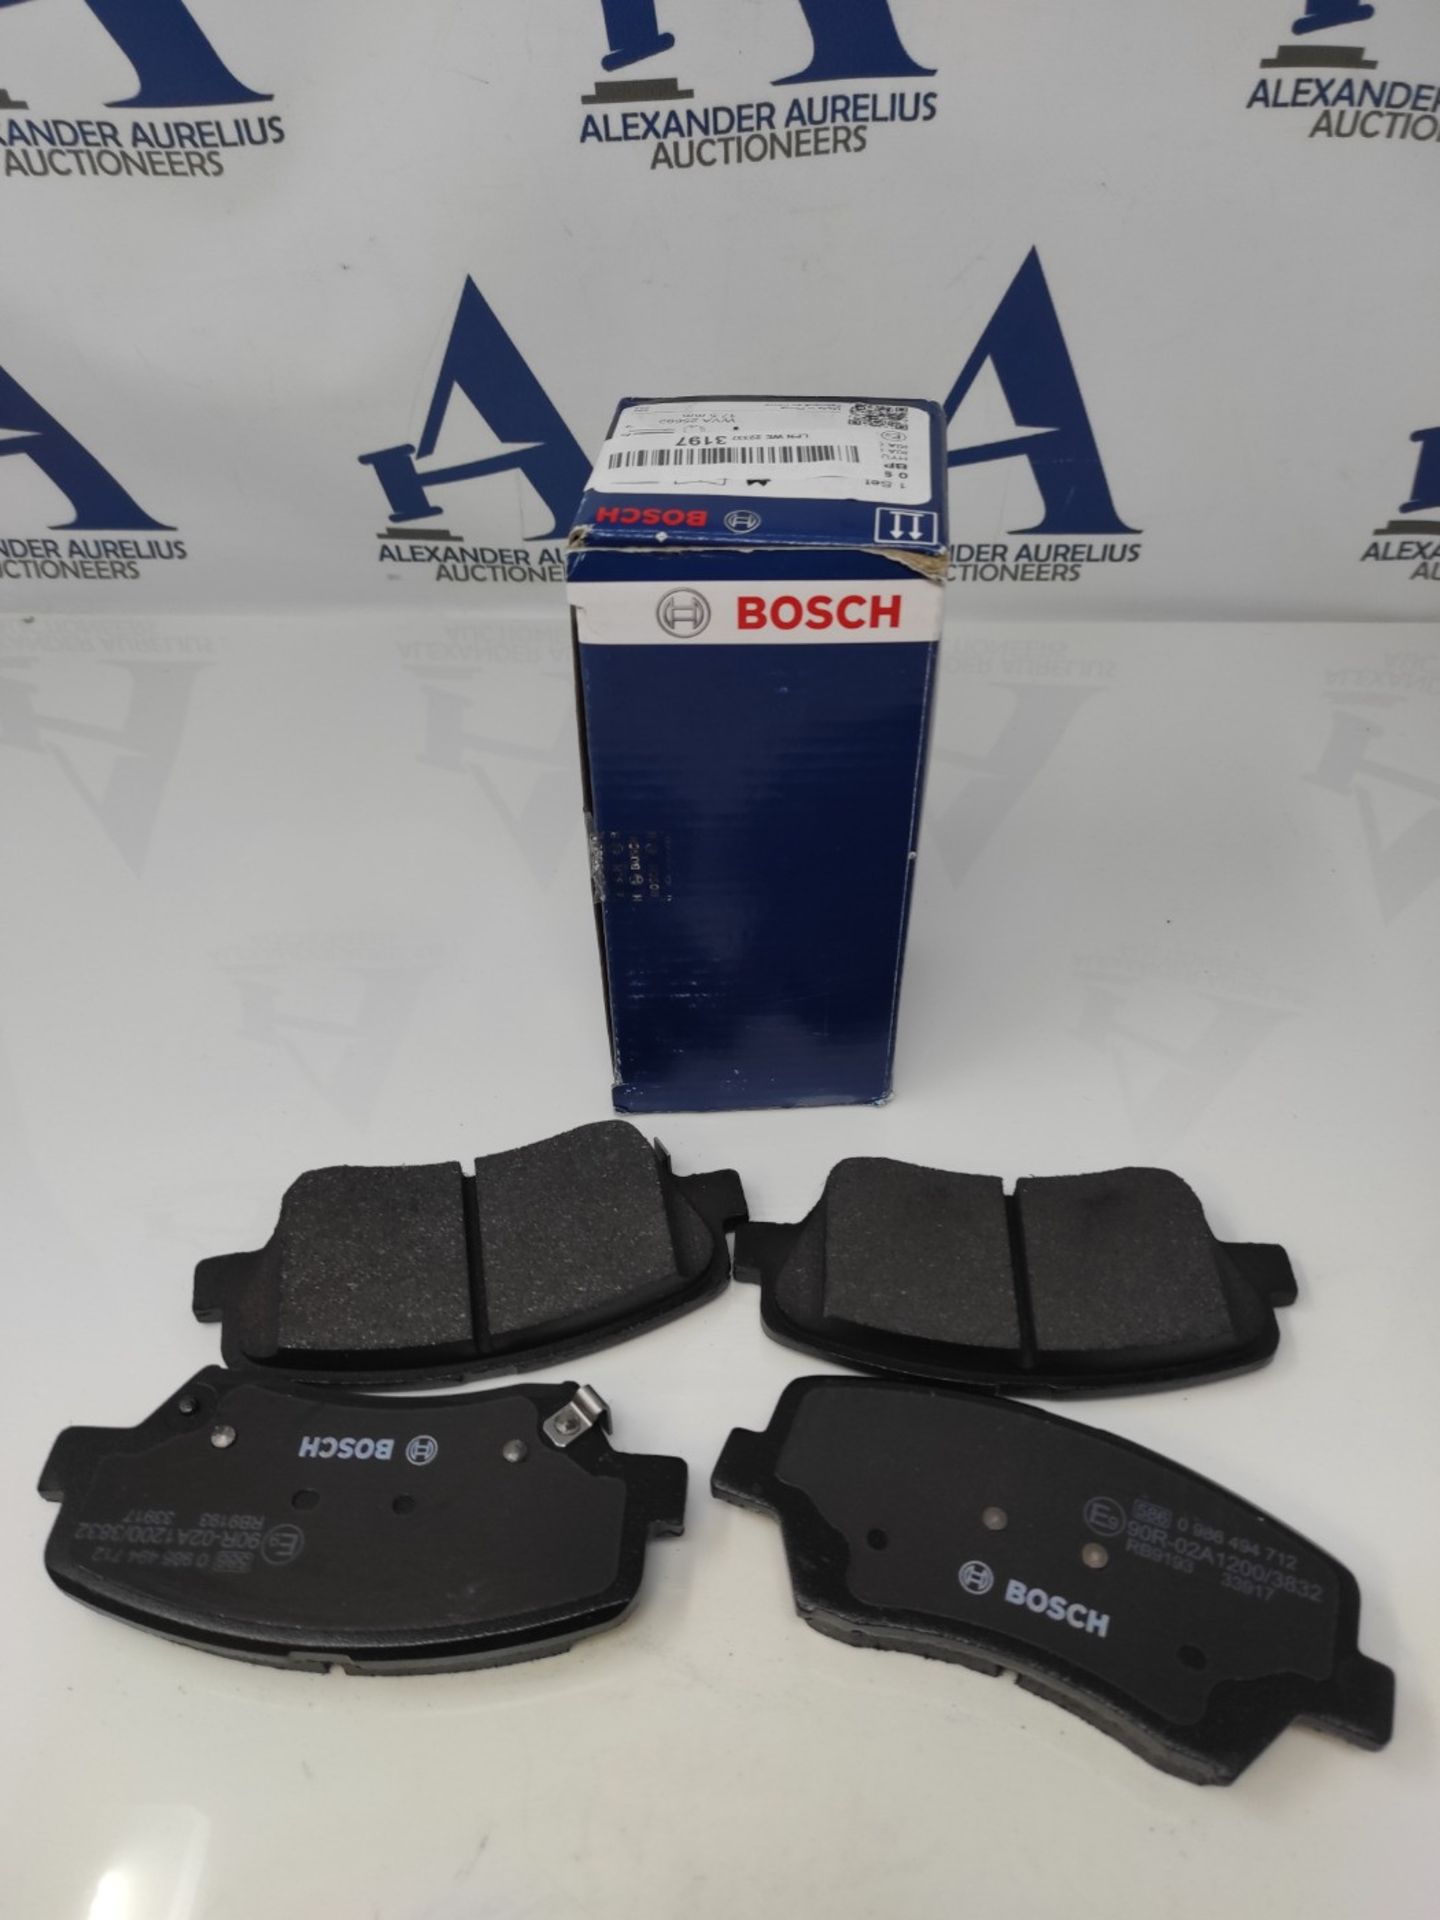 Bosch BP1707 Brake Pads - Front Axle - ECE-R90 Certified - 1 Set of 4 Pads - Image 2 of 2